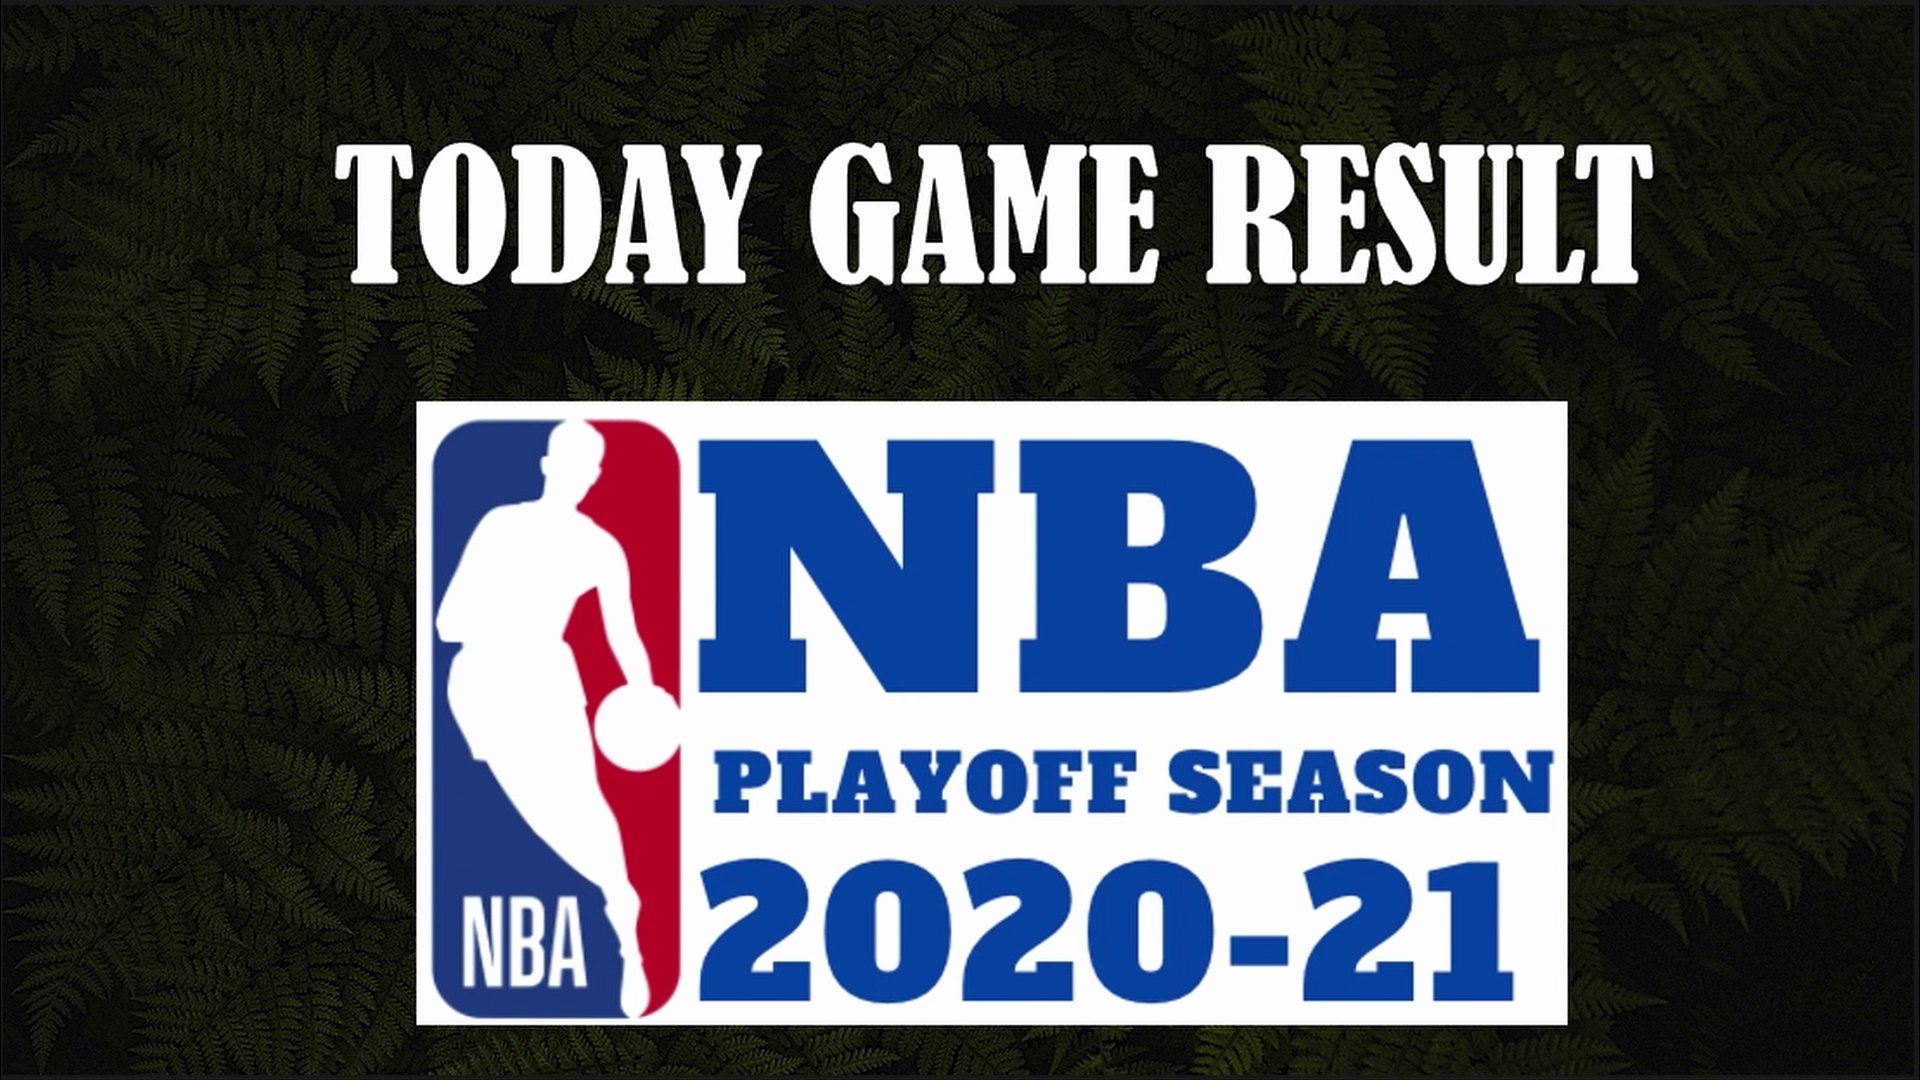 NBA GAMES RESULT TODAY & NBA TEAM STANDING TODAY, JUNE 18 2021